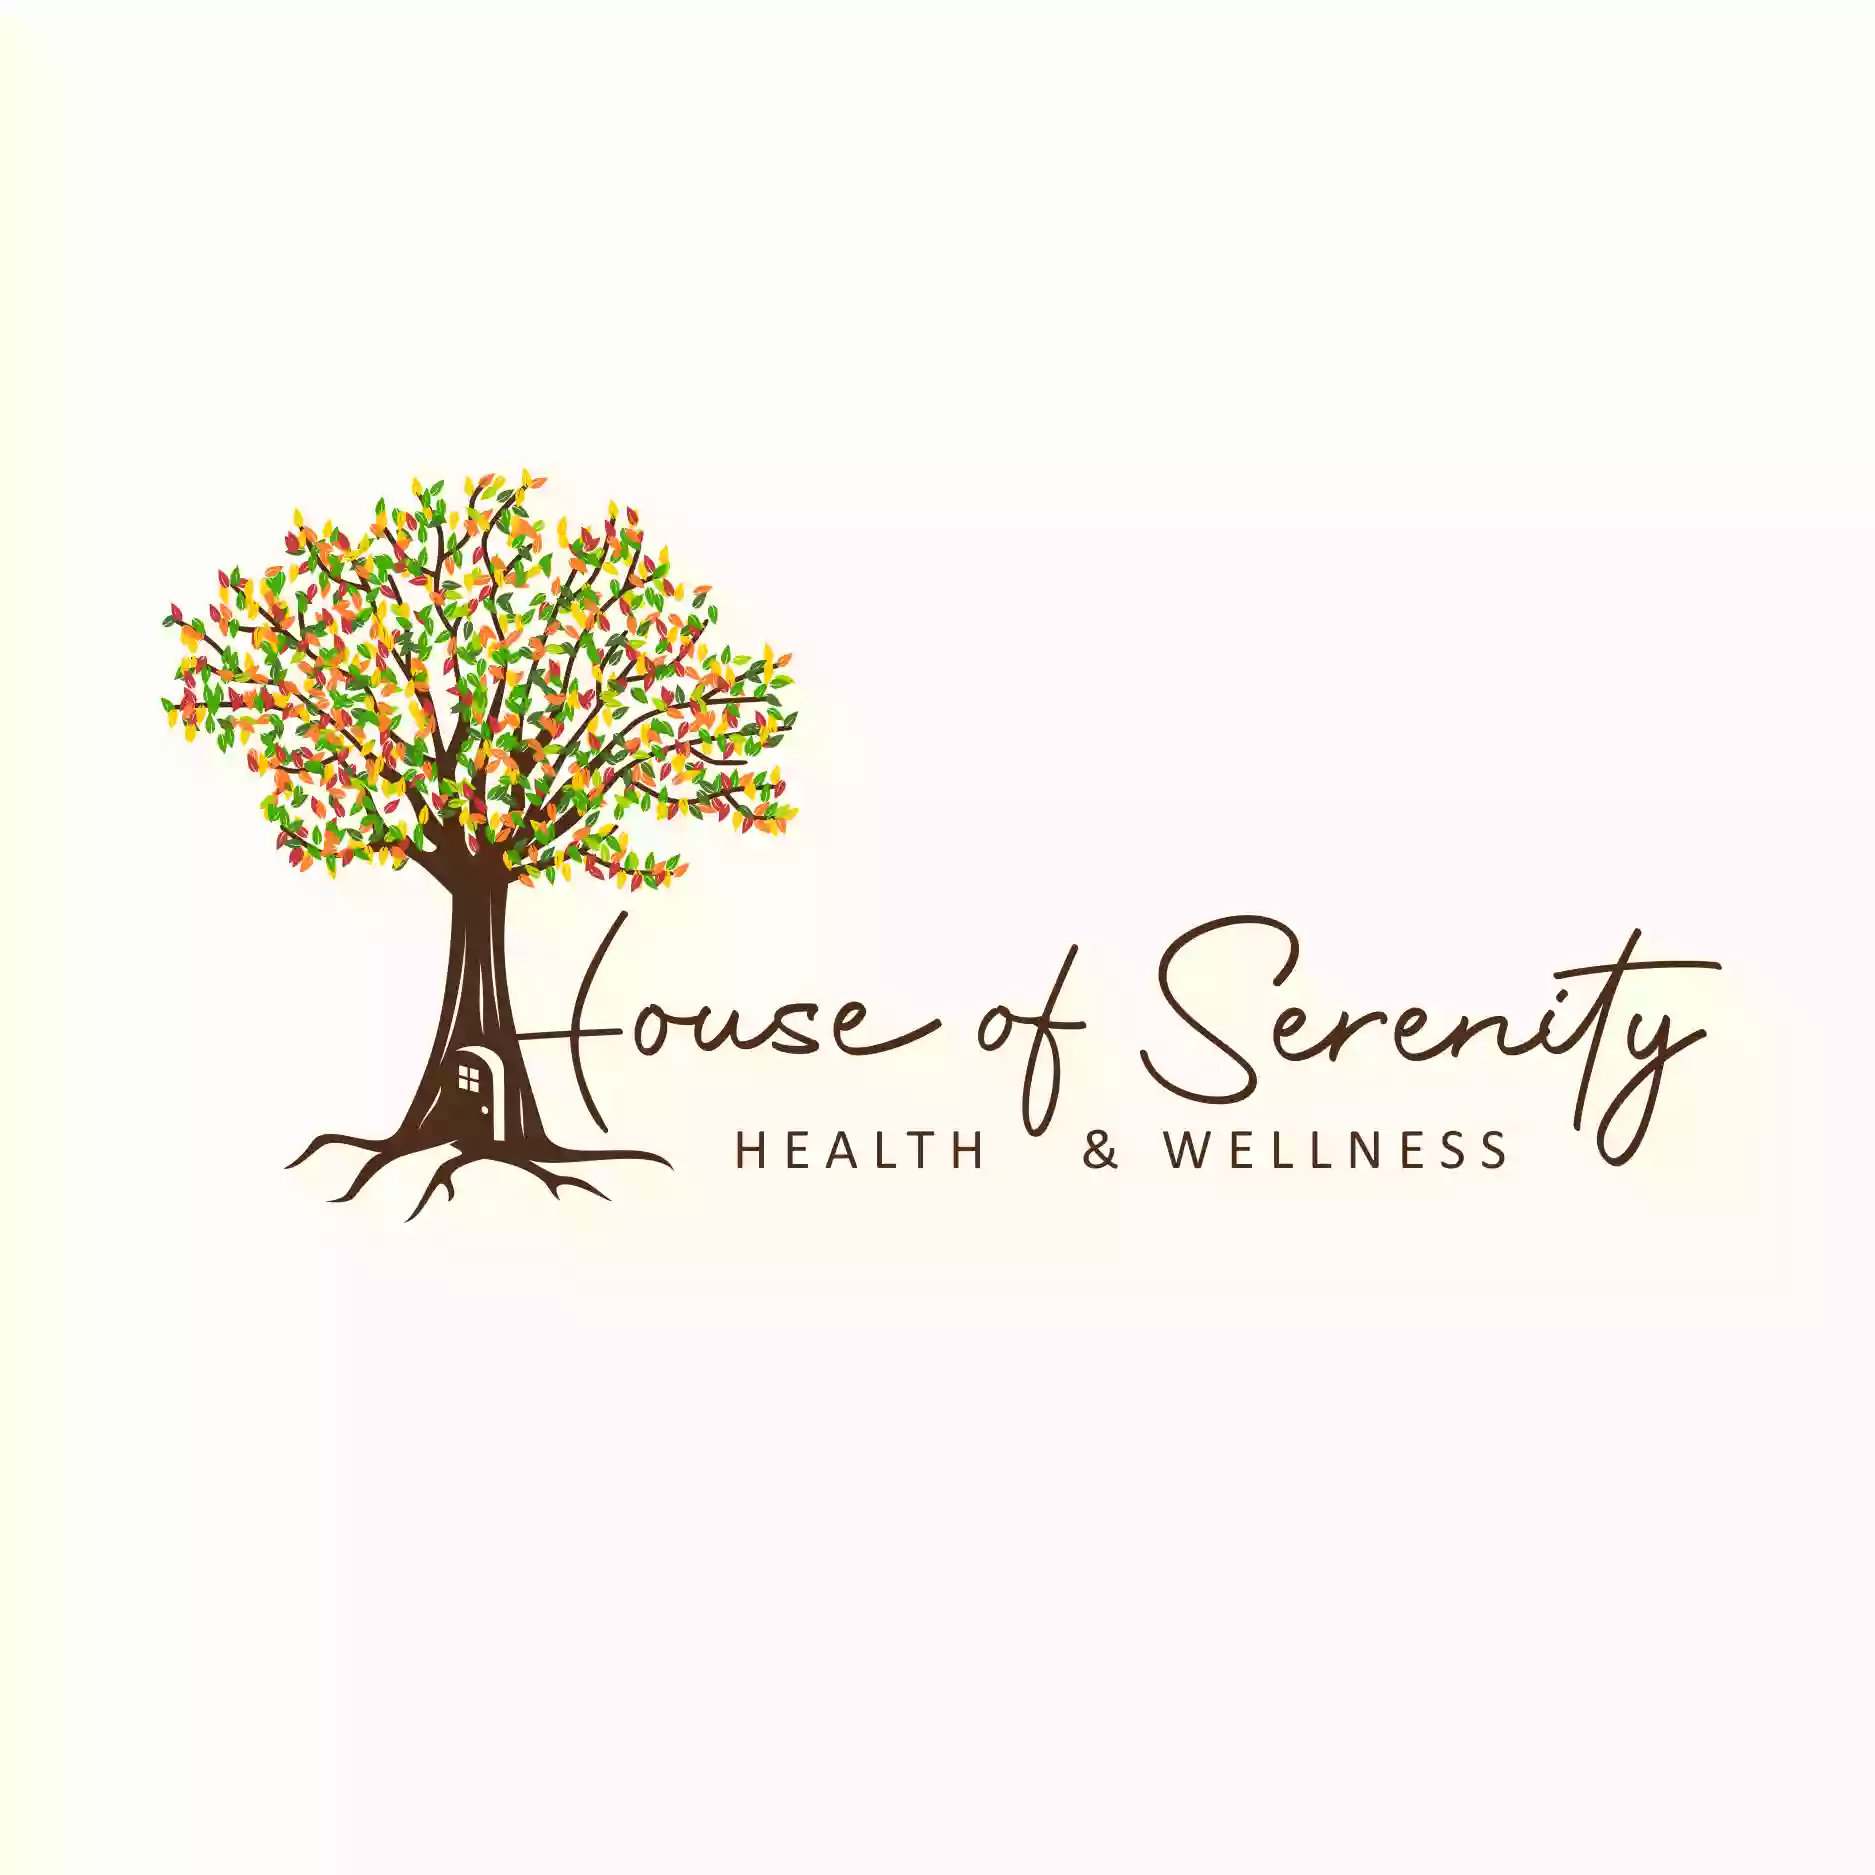 House of Serenity Health and Wellness